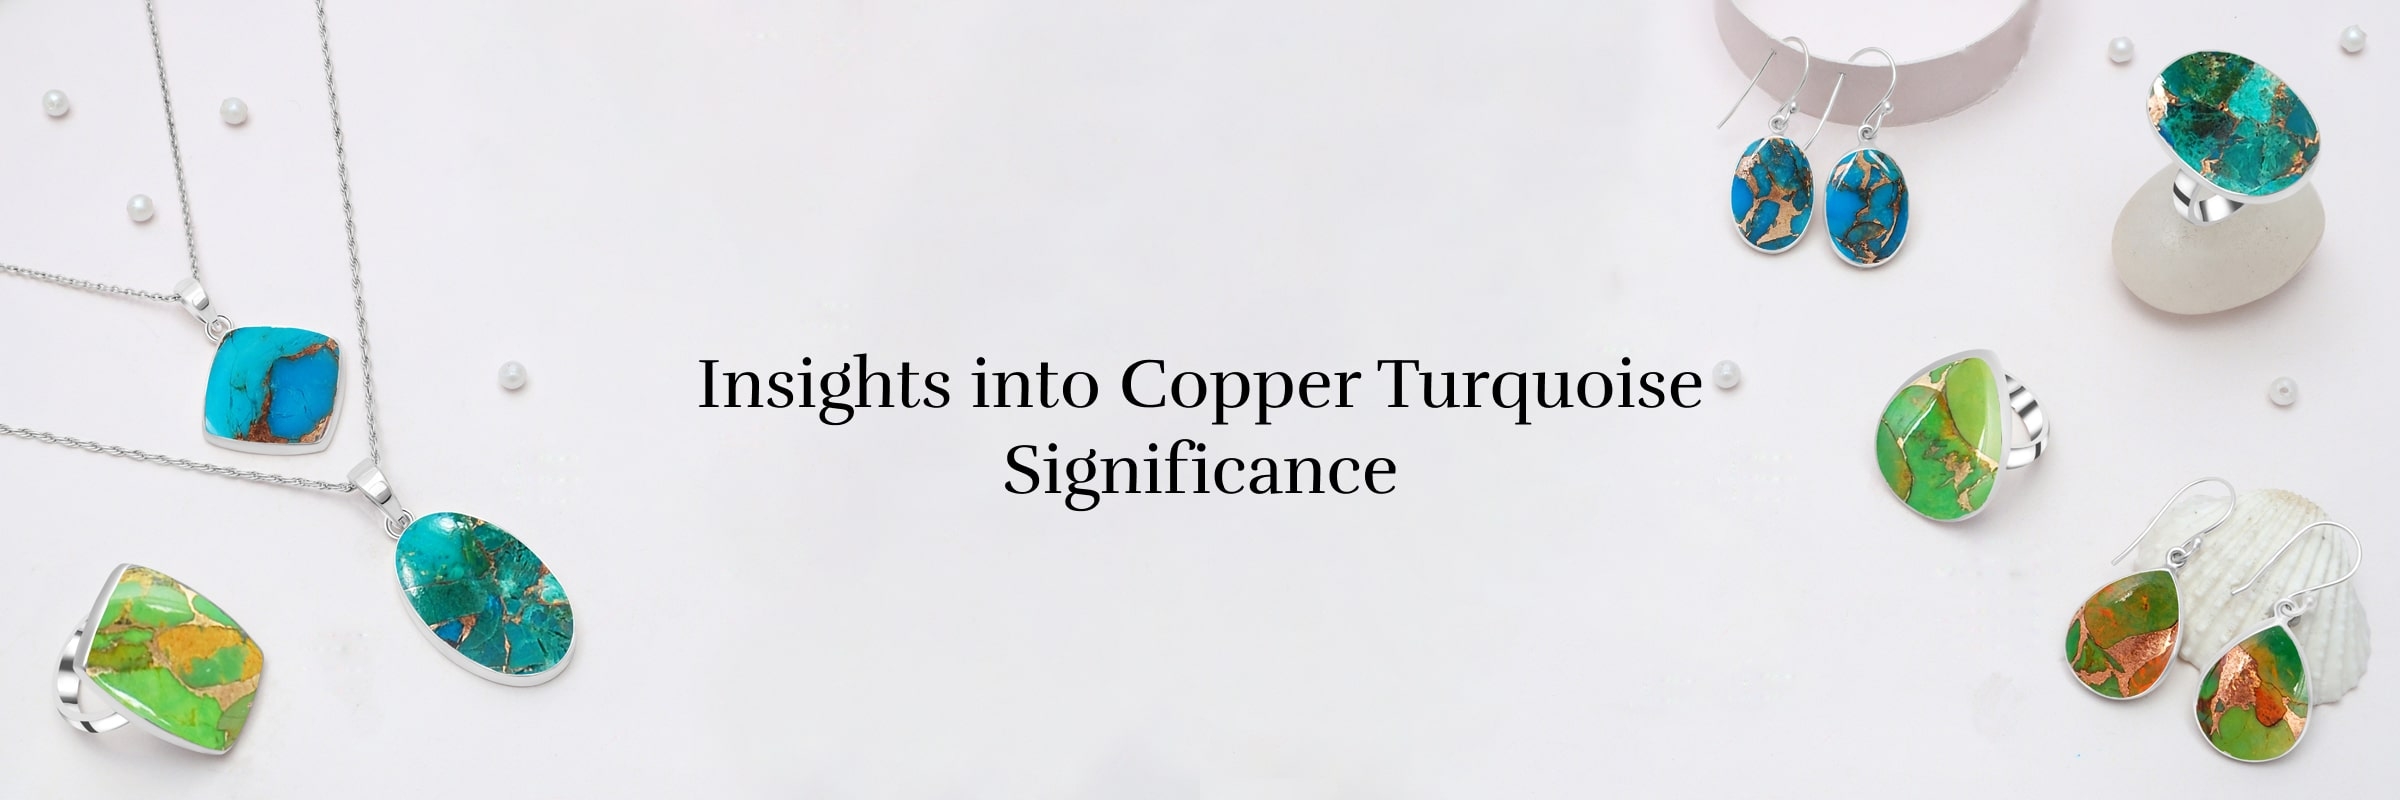 Copper Turquoise Meaning, Healing Properties, Facts, Benefits, Uses, and Beyond